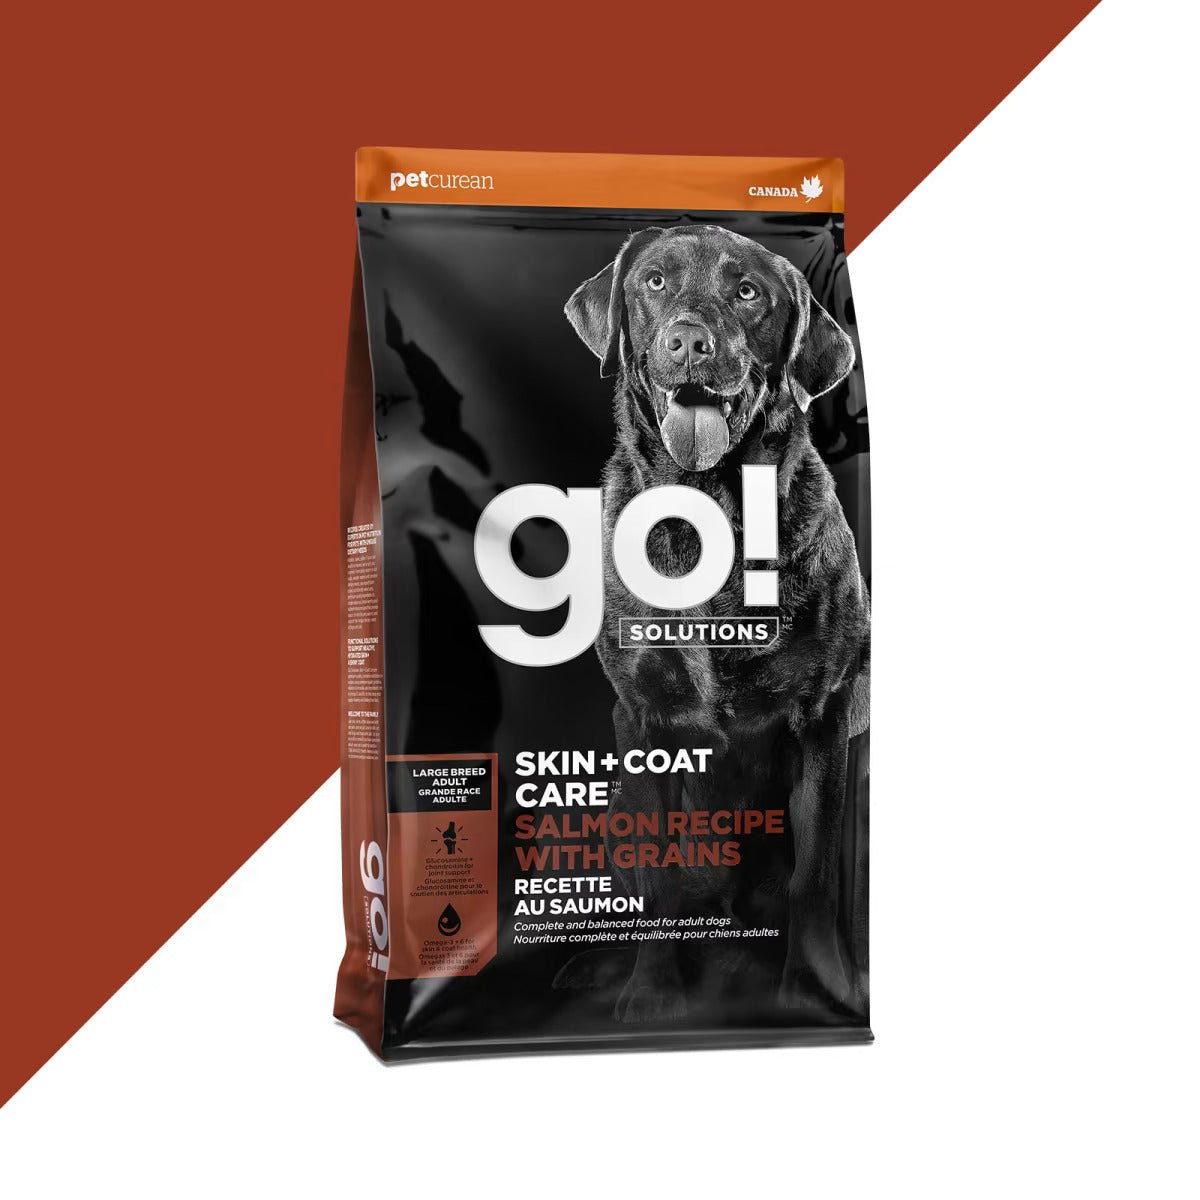 Skin + Coat Care Large Breed Adult Salmon Recipe With Grains - Dry Dog Food - Go! Solutions - PetToba-Go! Solutions